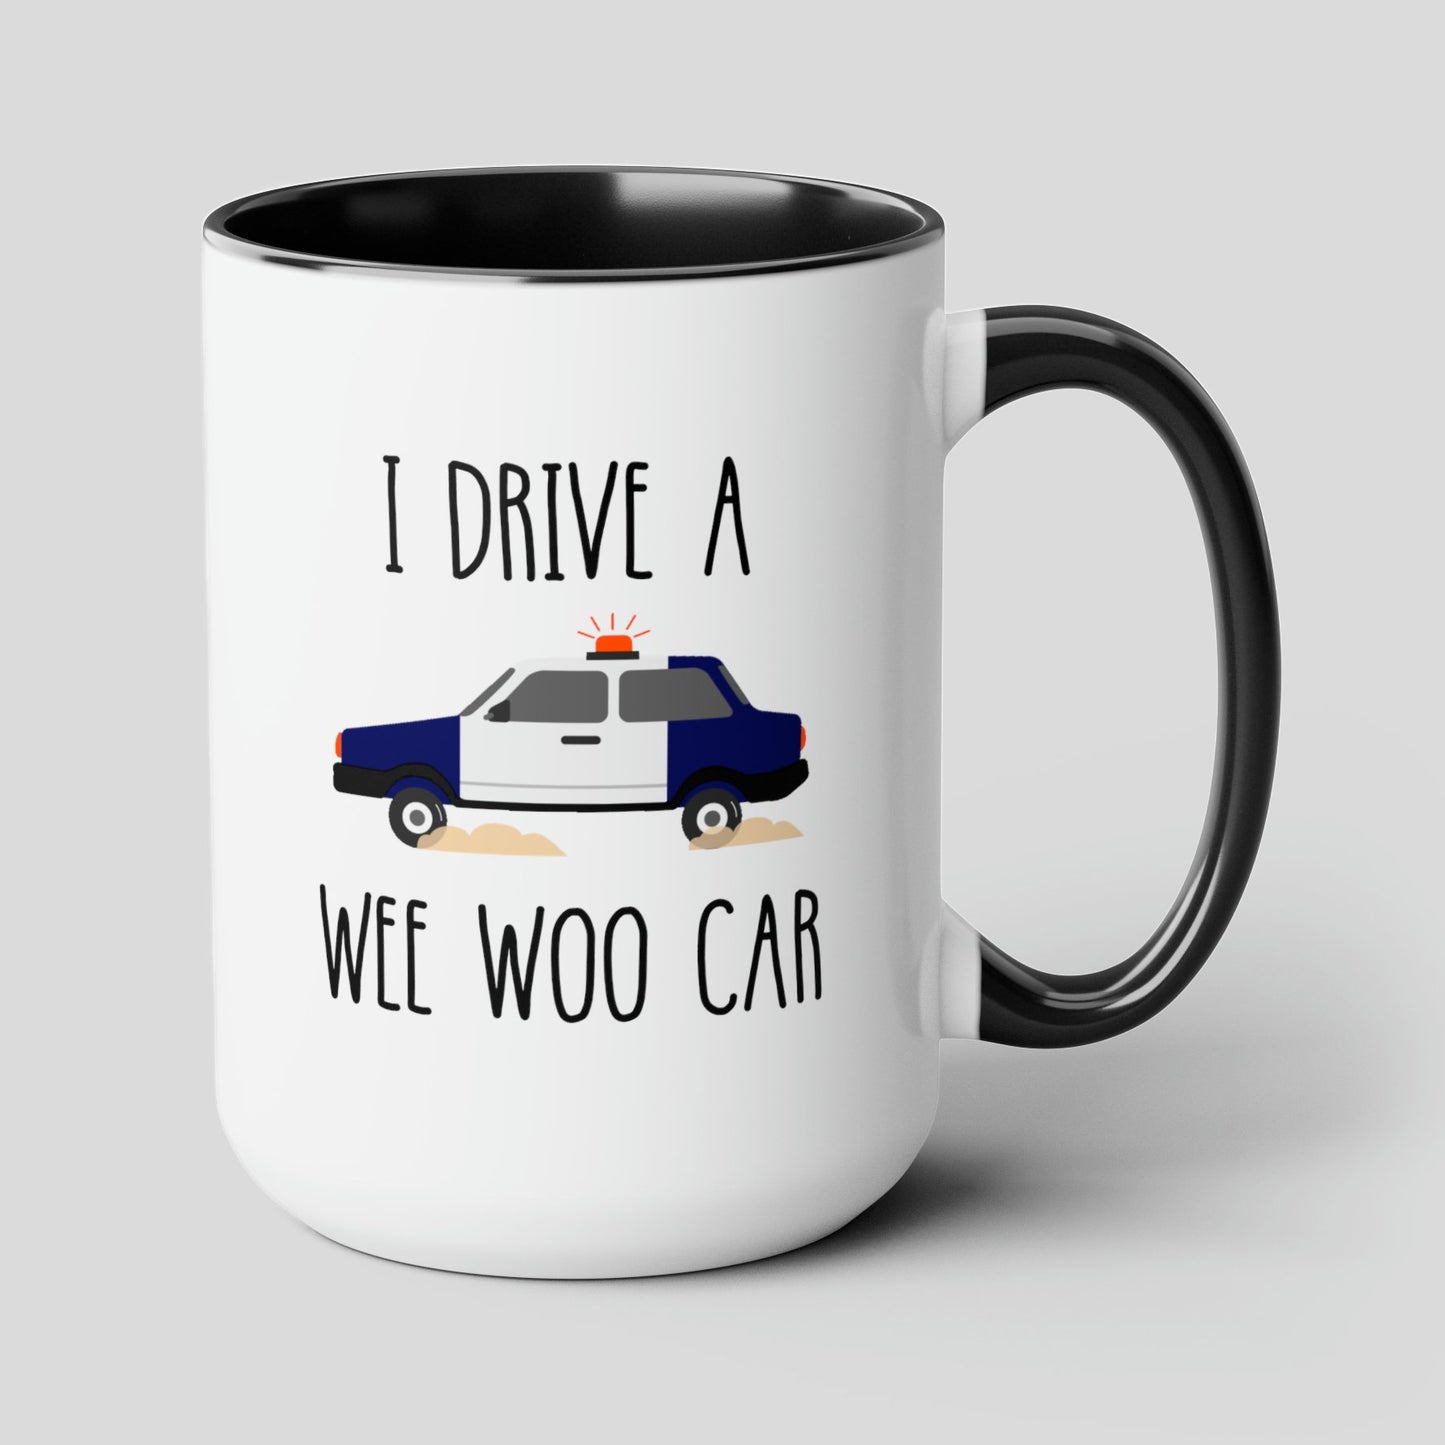 I Drive A Wee Woo Car 15oz white with black accent funny large coffee mug gift for police cop officer graduation birthday waveywares wavey wares wavywares wavy wares cover